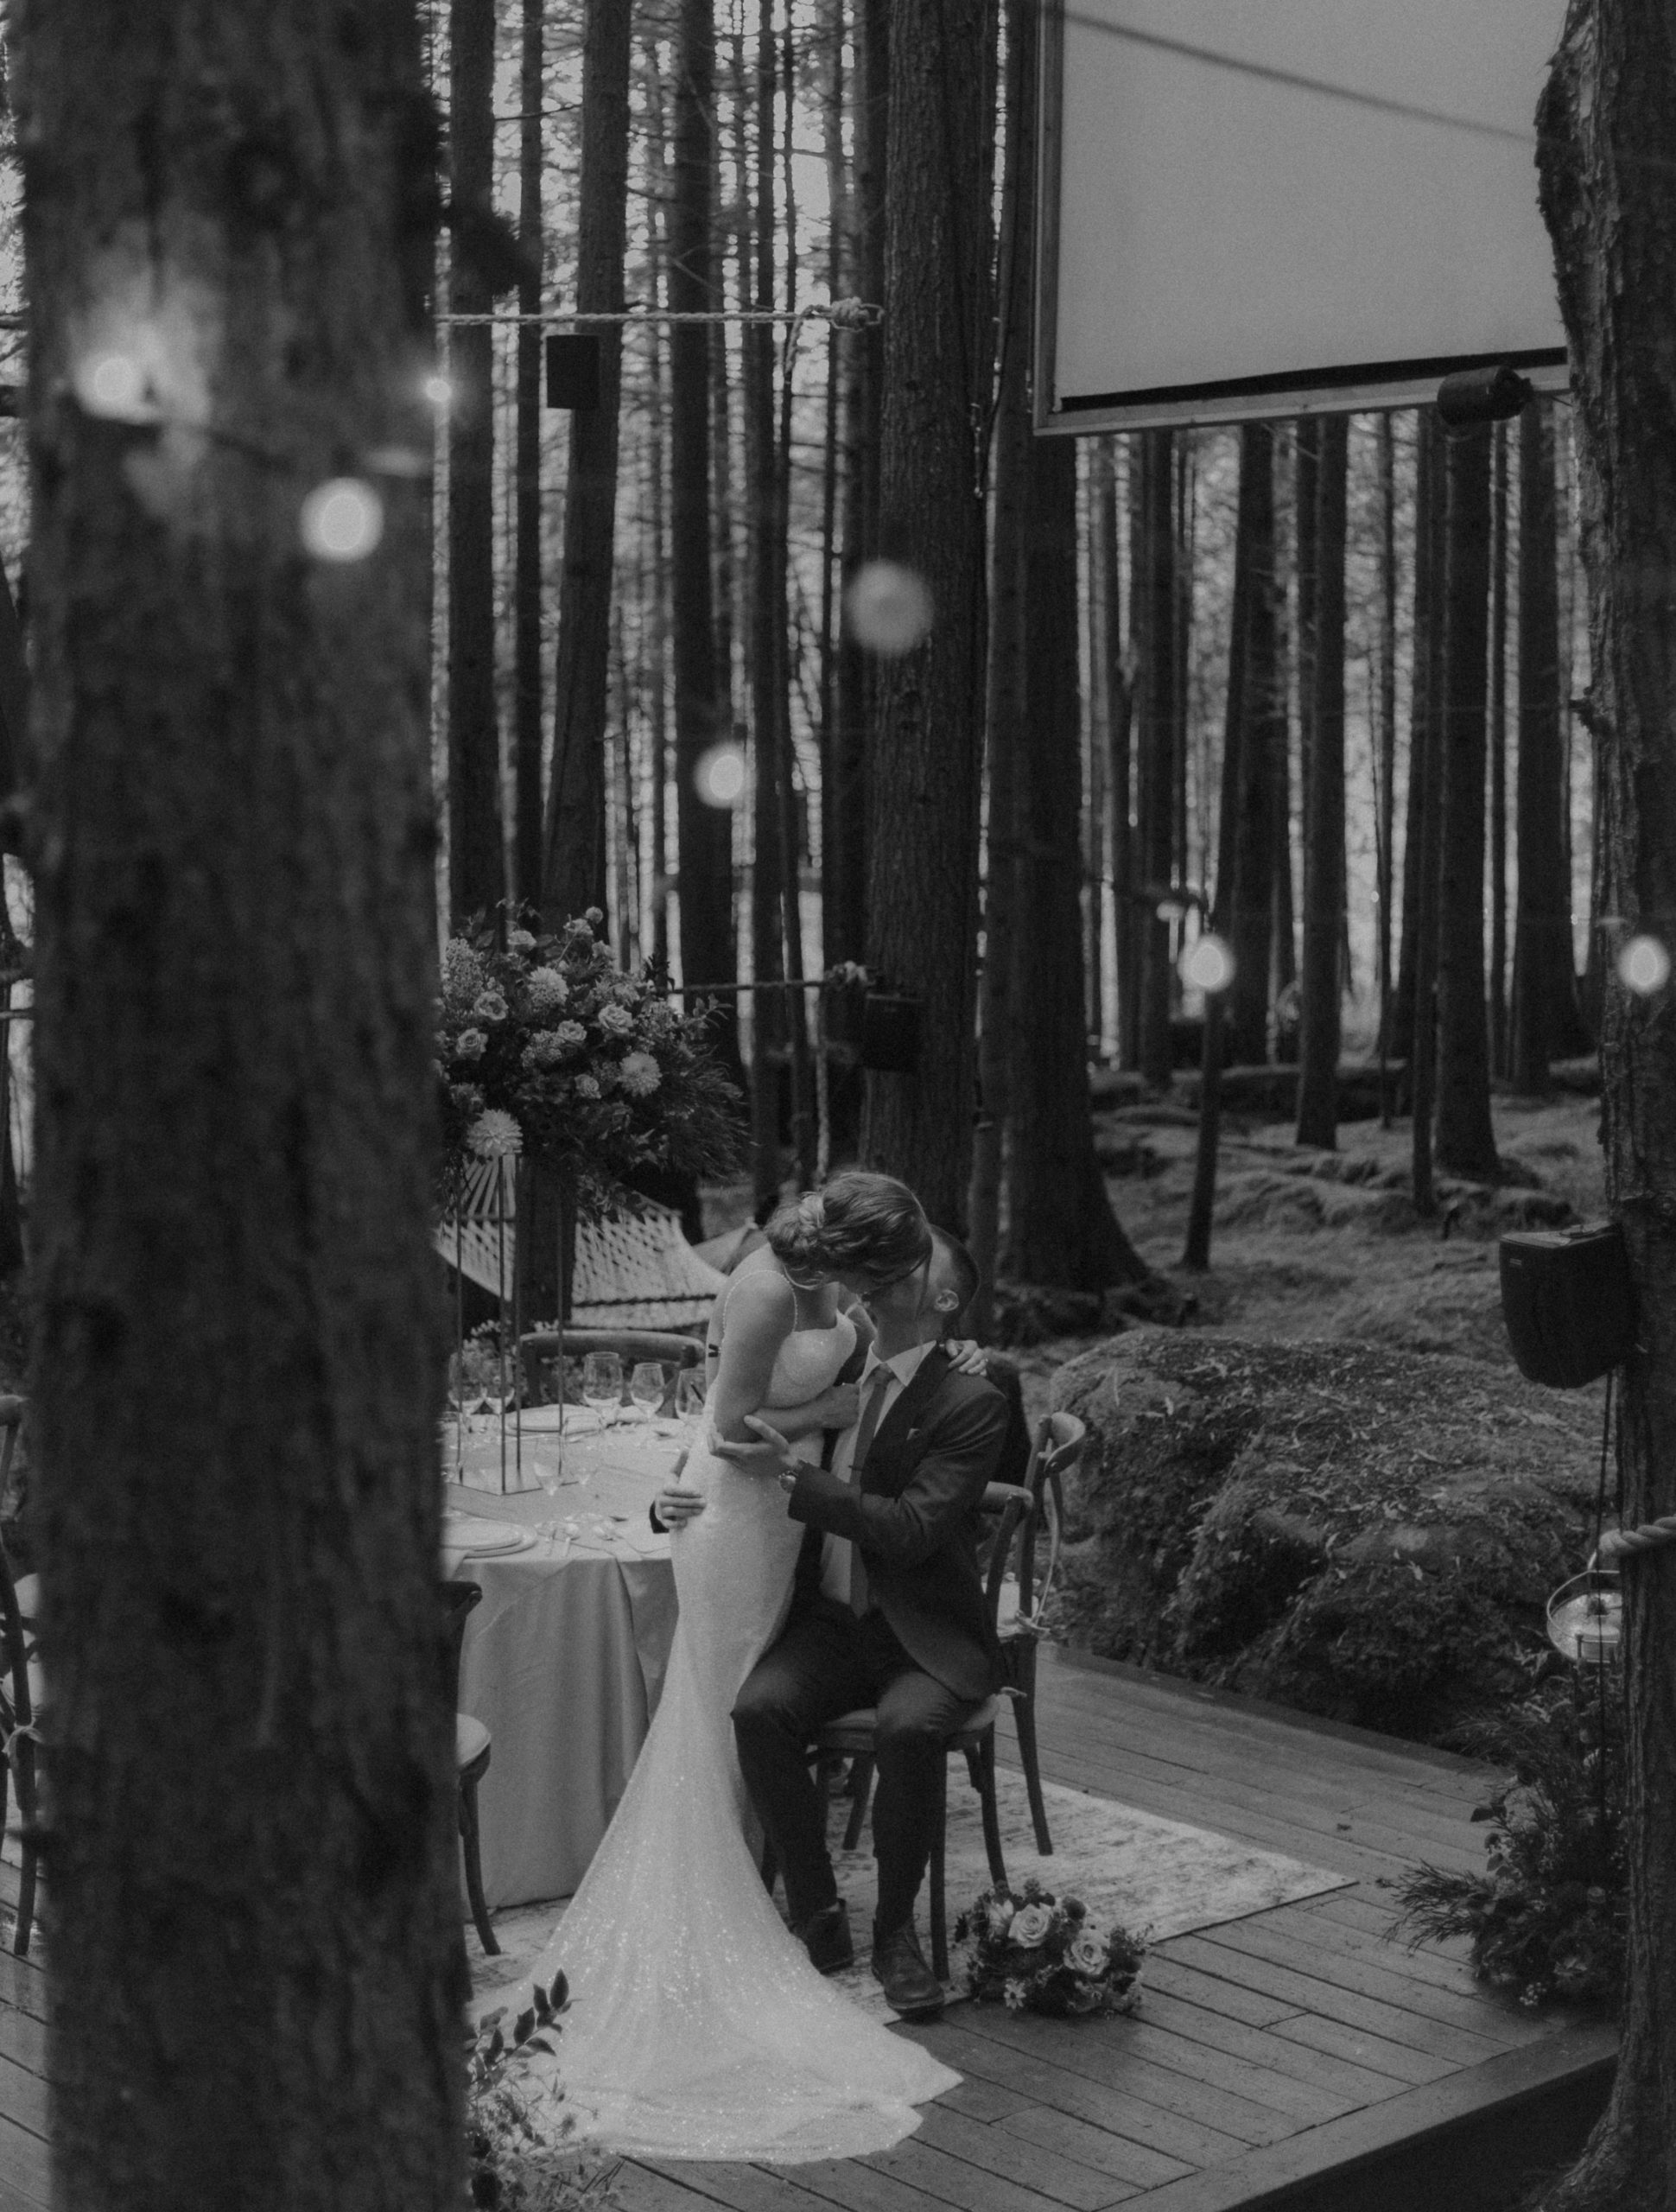 bride and groom kissing treehouse and emerald forest landscape

